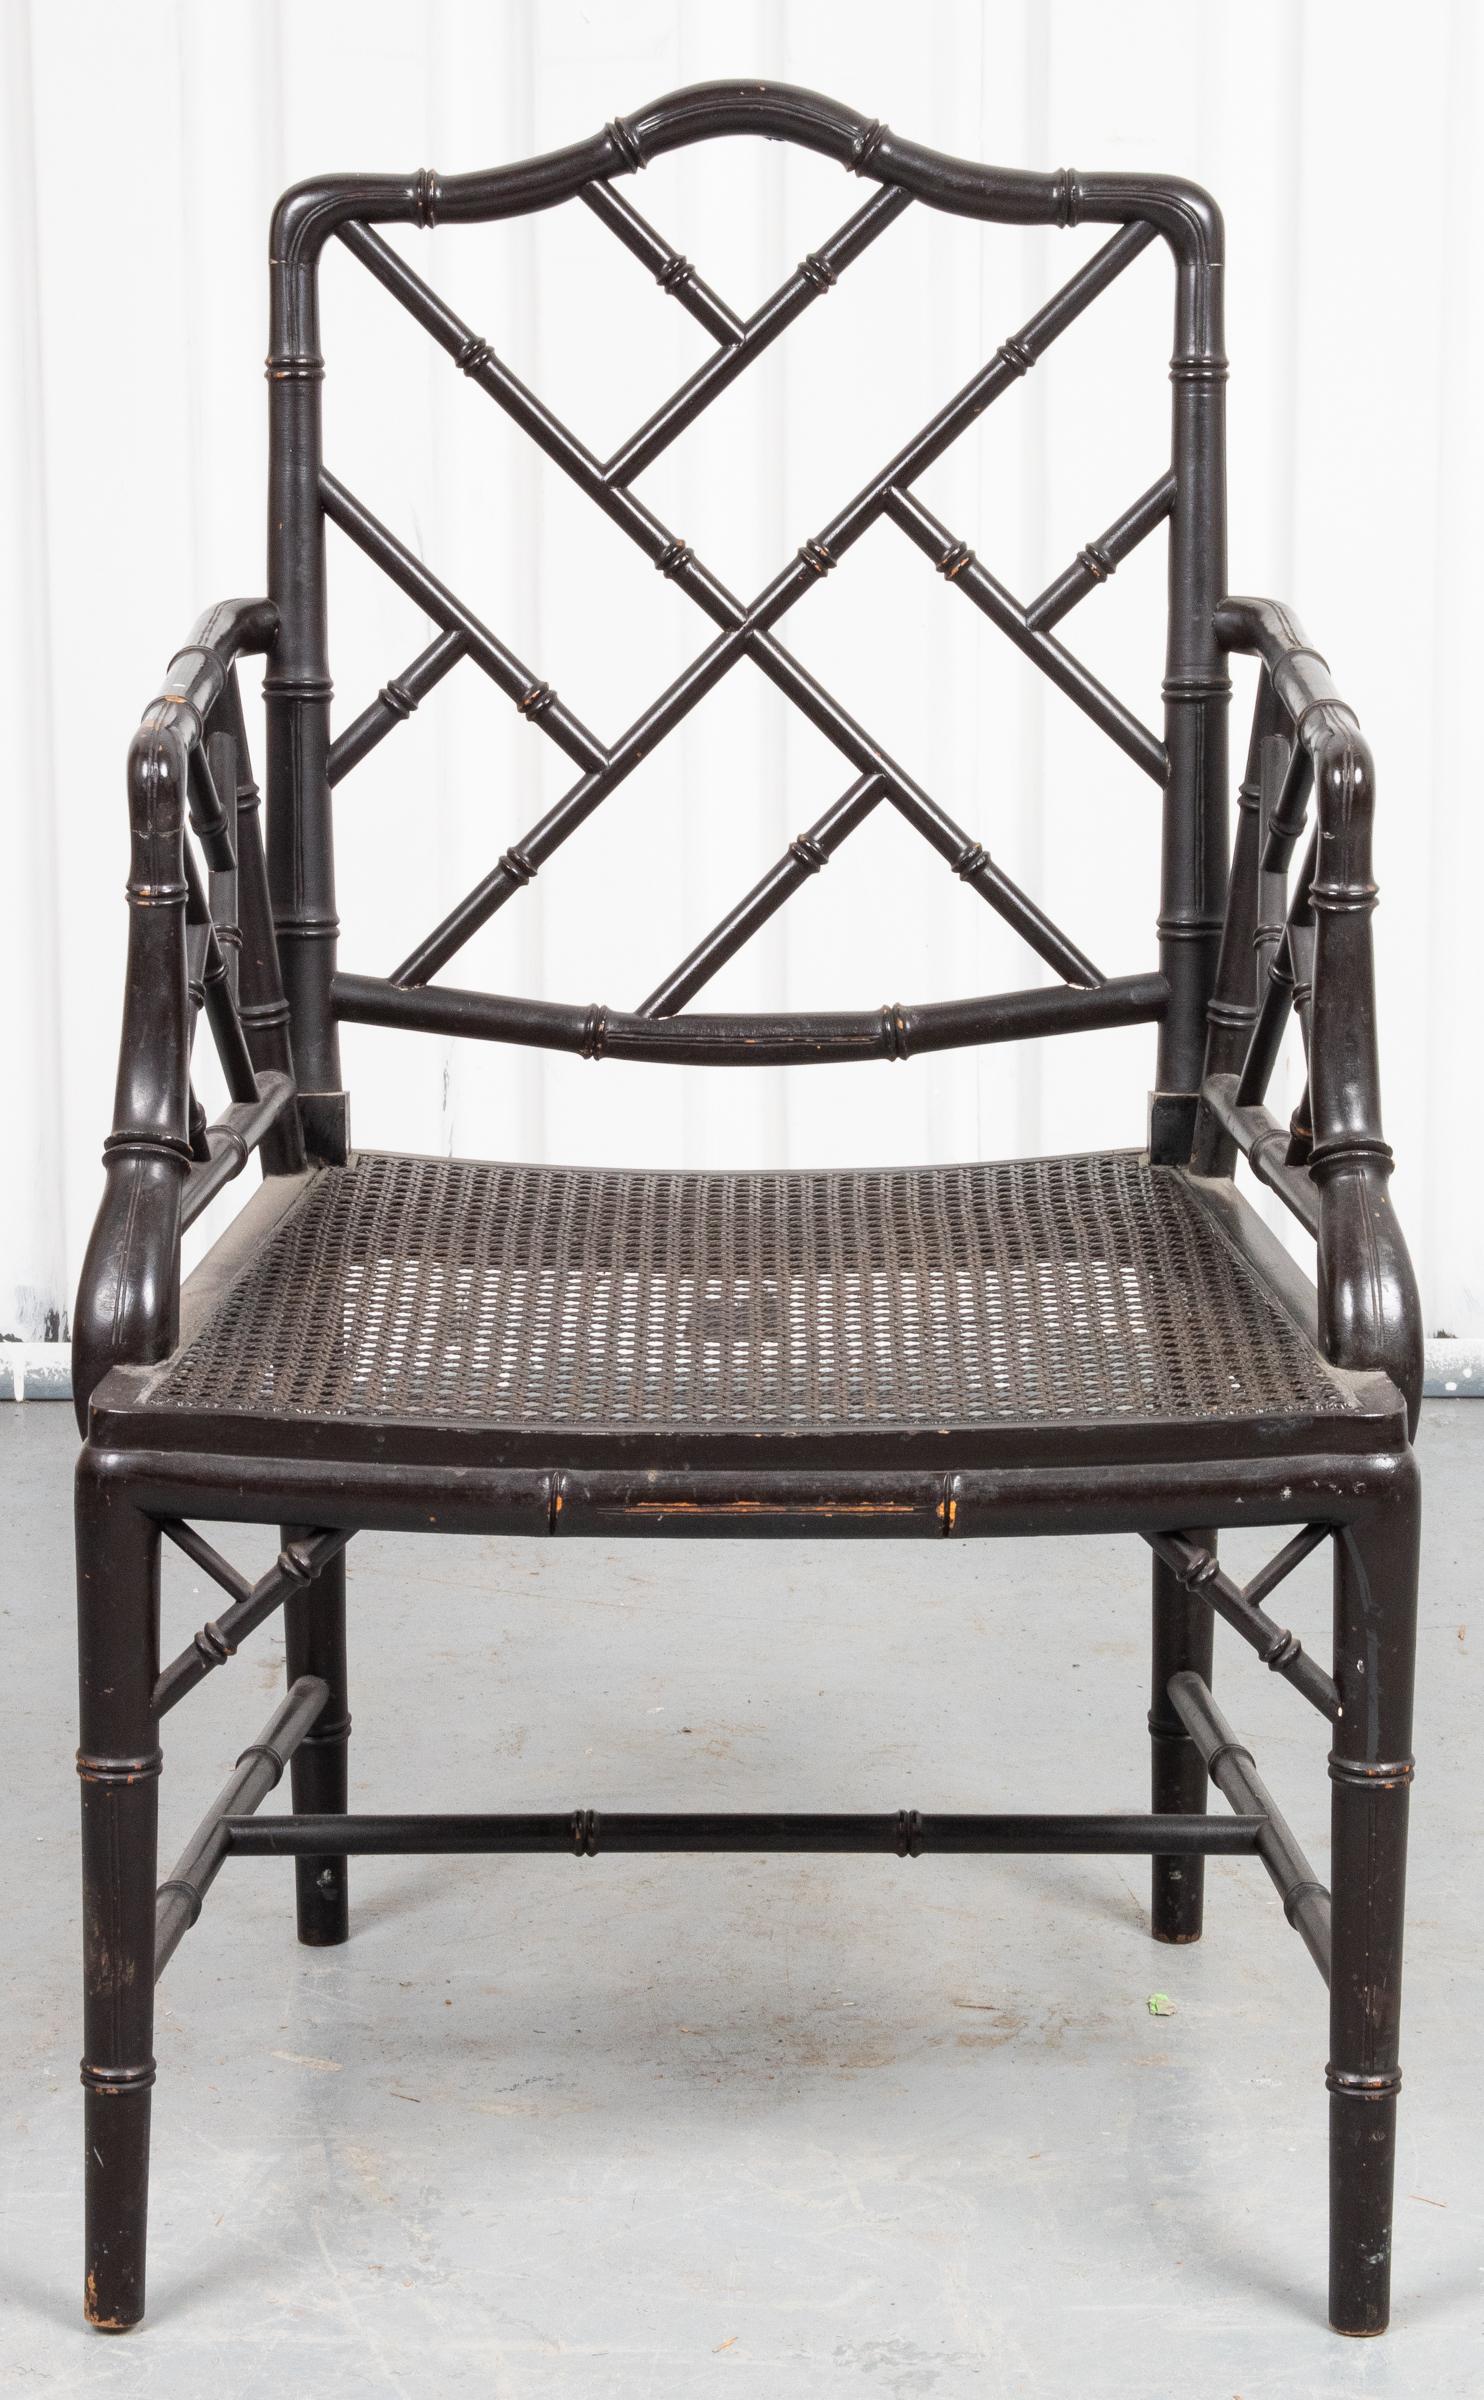 Pair of Hollywood Regency style black bamboo motif armchairs with cockpen back and caned seats. Measures: 36.5” H x 24” W x 21” D.